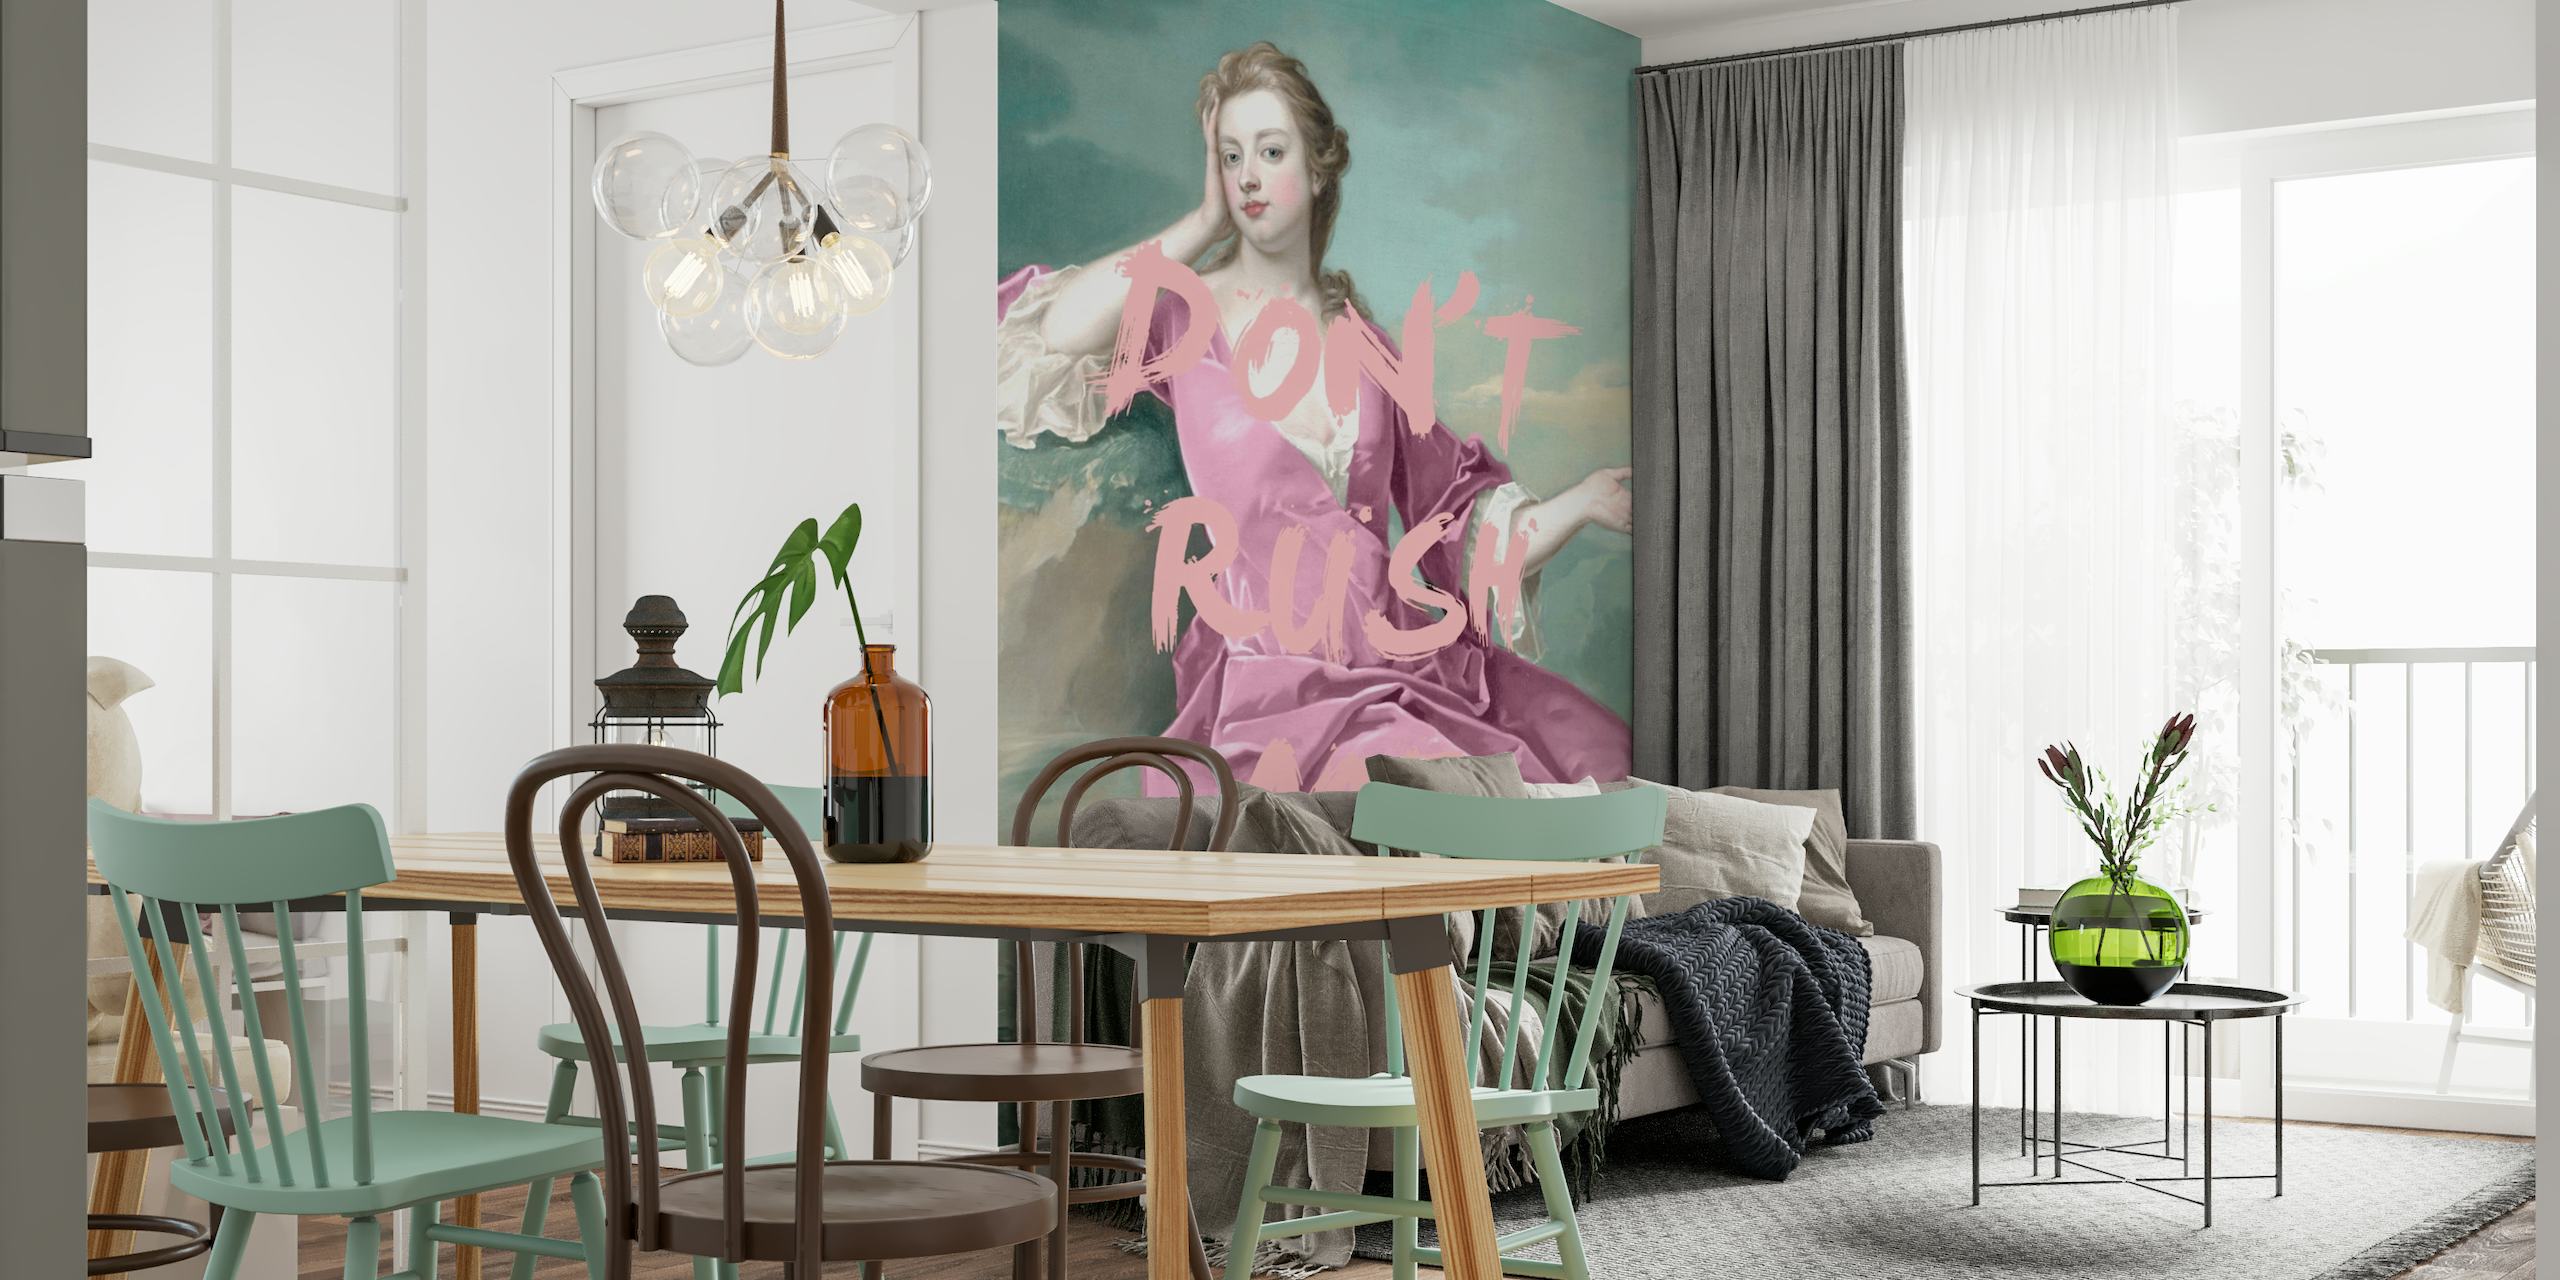 Renaissance-inspired figure in pink gown with 'Don't Rush Me' text overlay wall mural